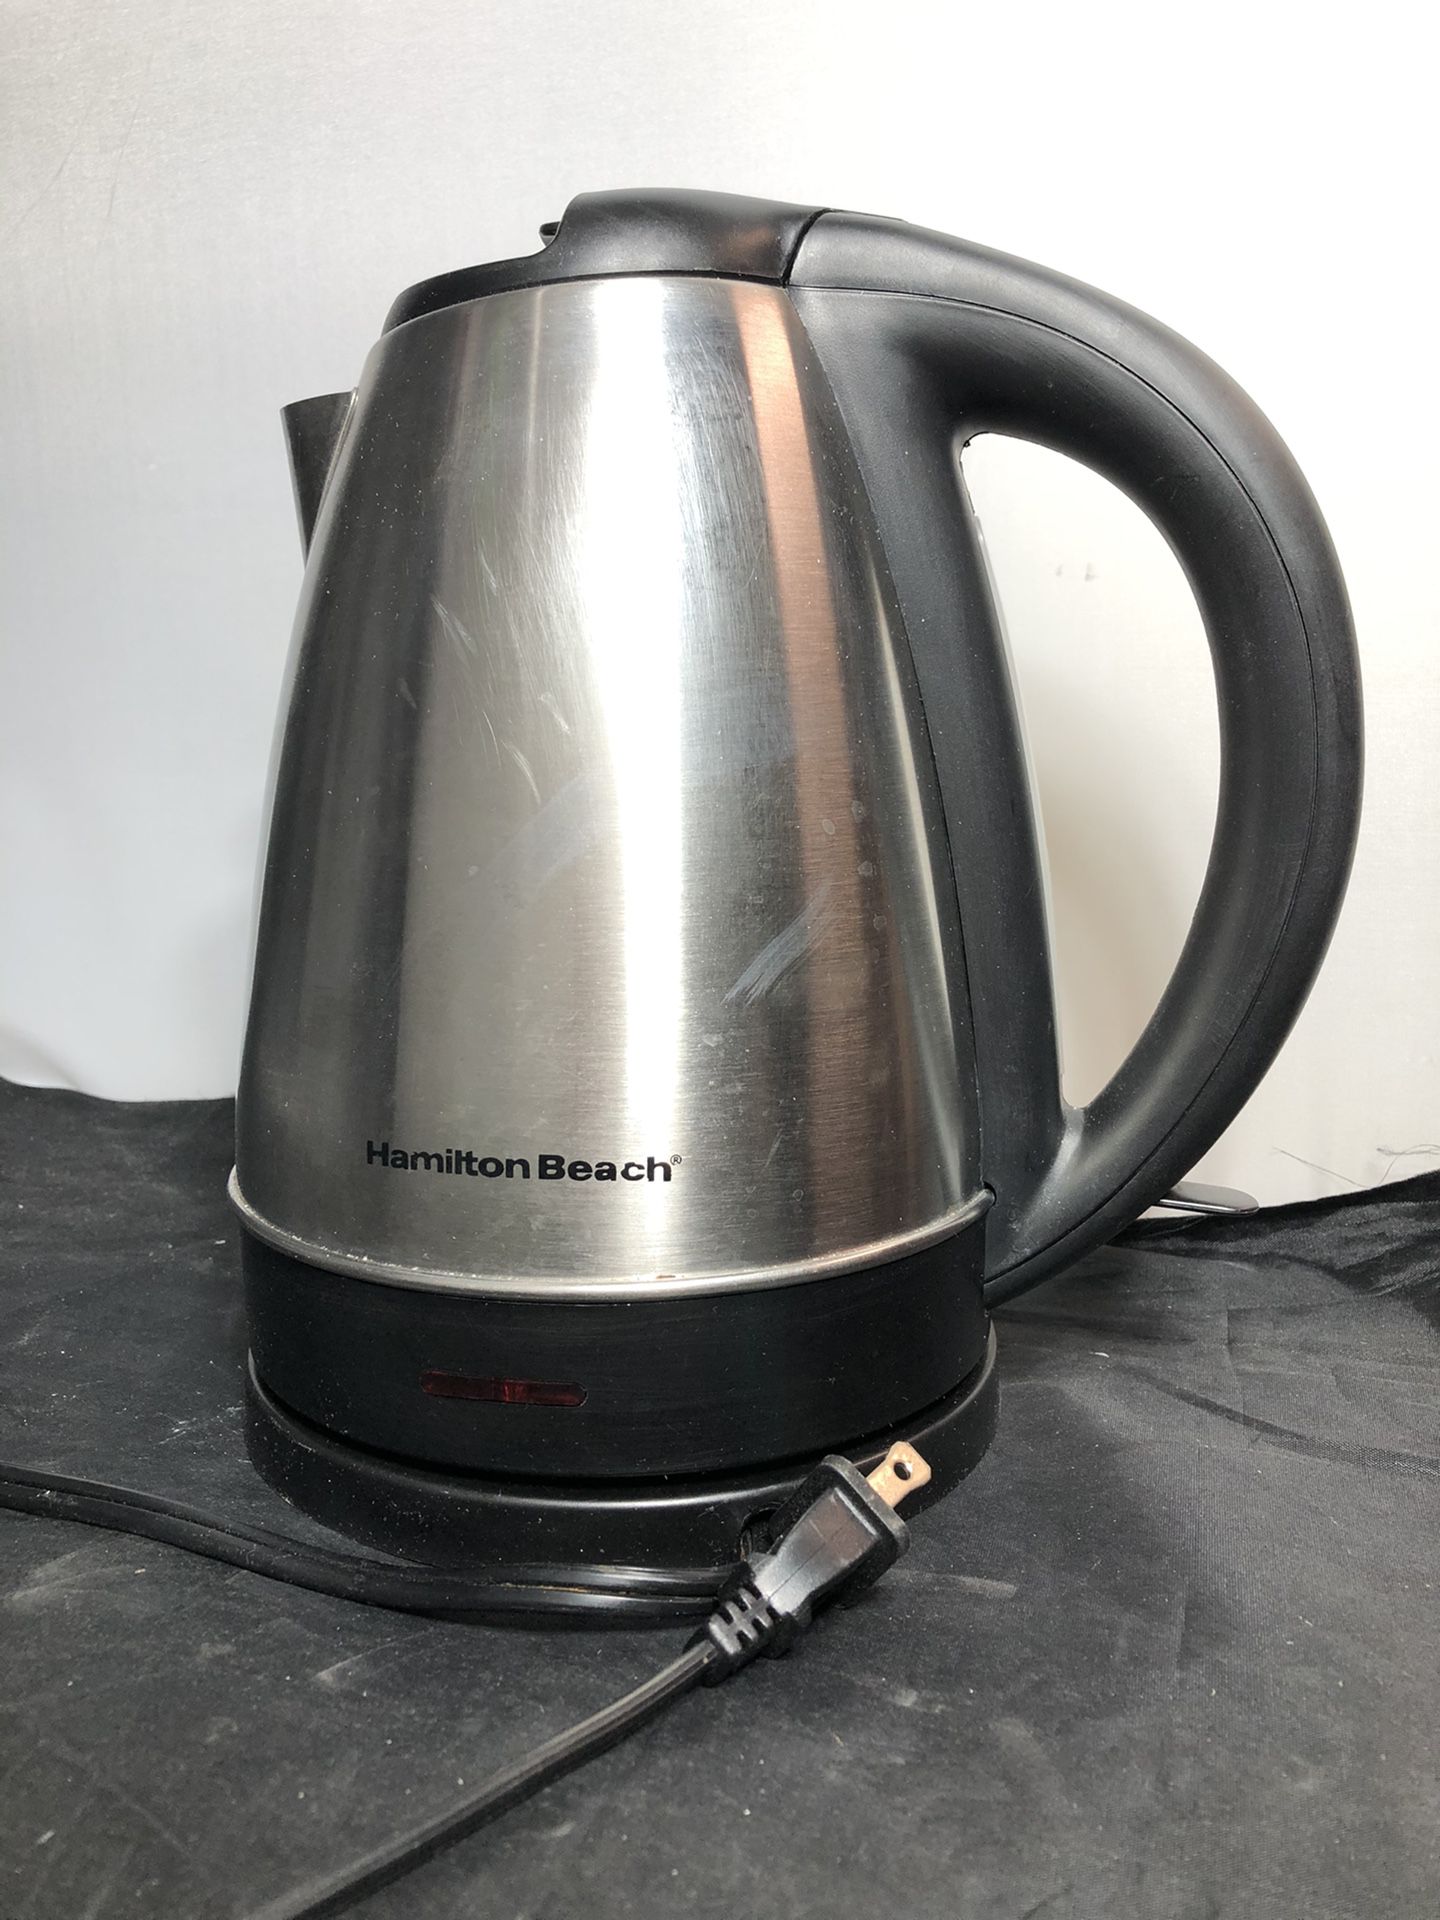 Farberware stainless steer water kettle for Sale in New Haven, CT - OfferUp